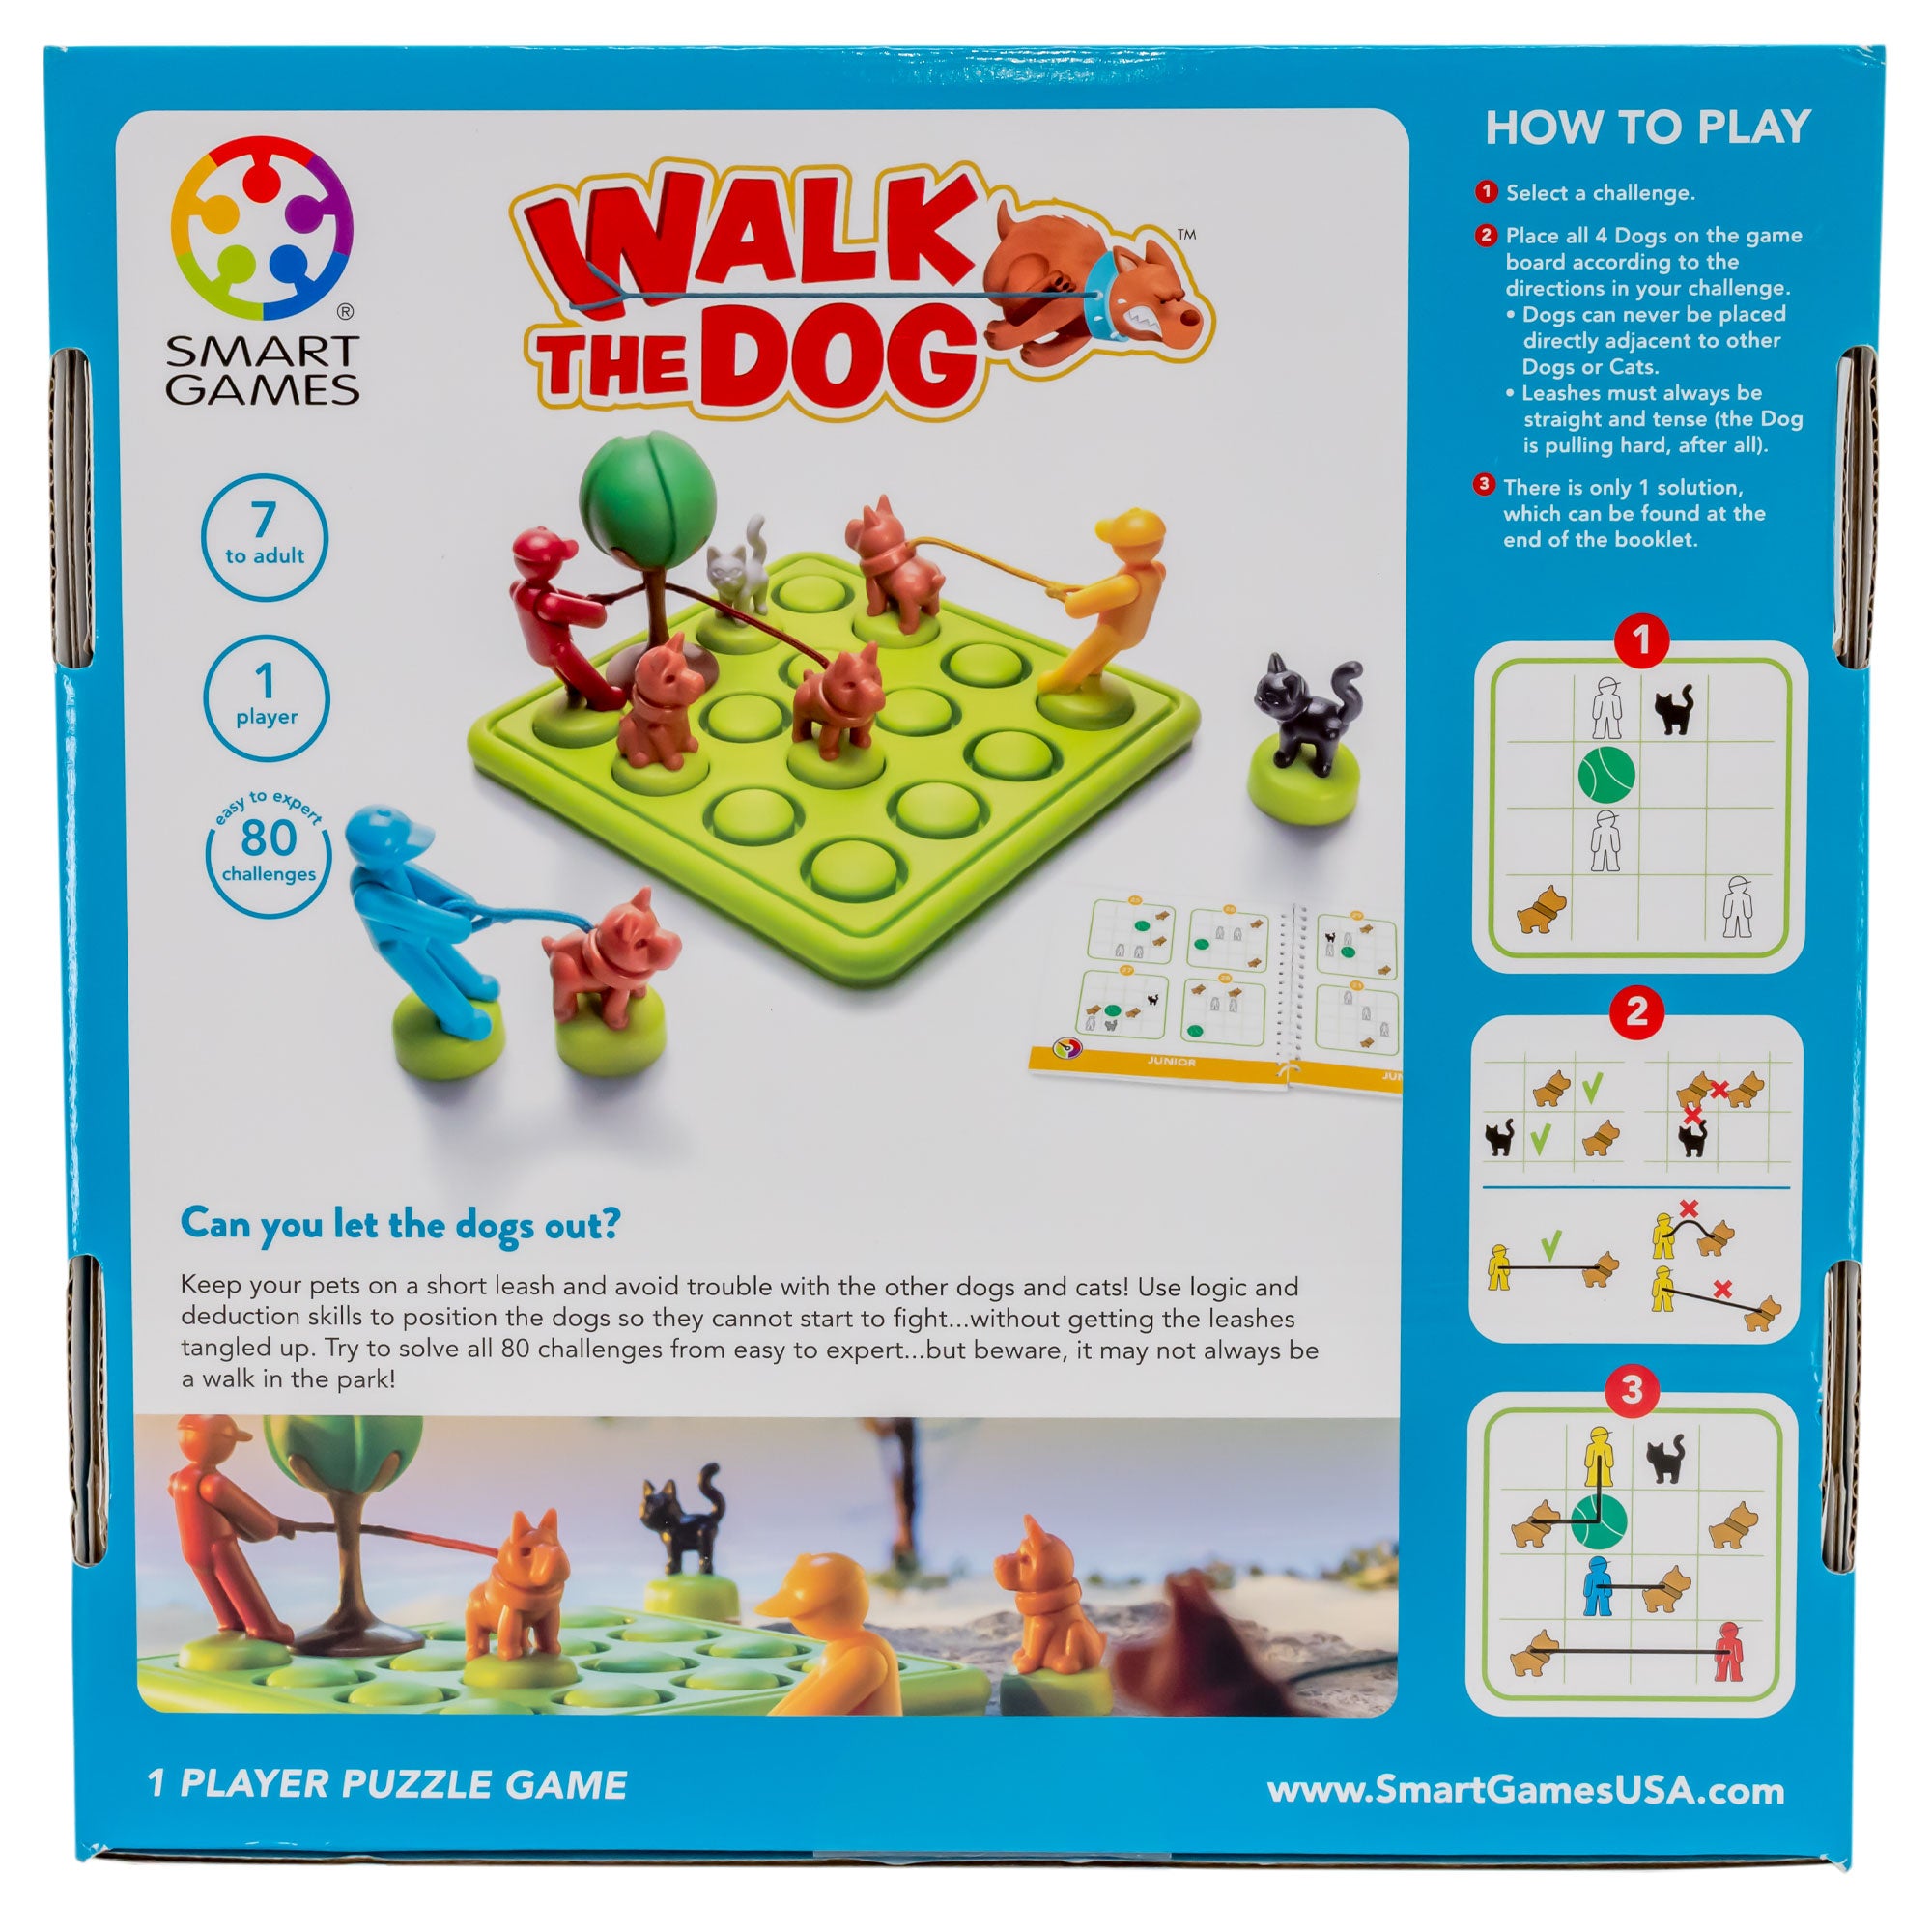 The Walk the Dog Smart Game box back. The box shows the game board with pieces all around. The pieces are colorful men with leashes attached to a dog, a cat, and a tree. To the right are 3 pictures, showing how to play the game. The box indicates that the game is 1-player and is recommended for age 7 or older. There are 80 challenges.